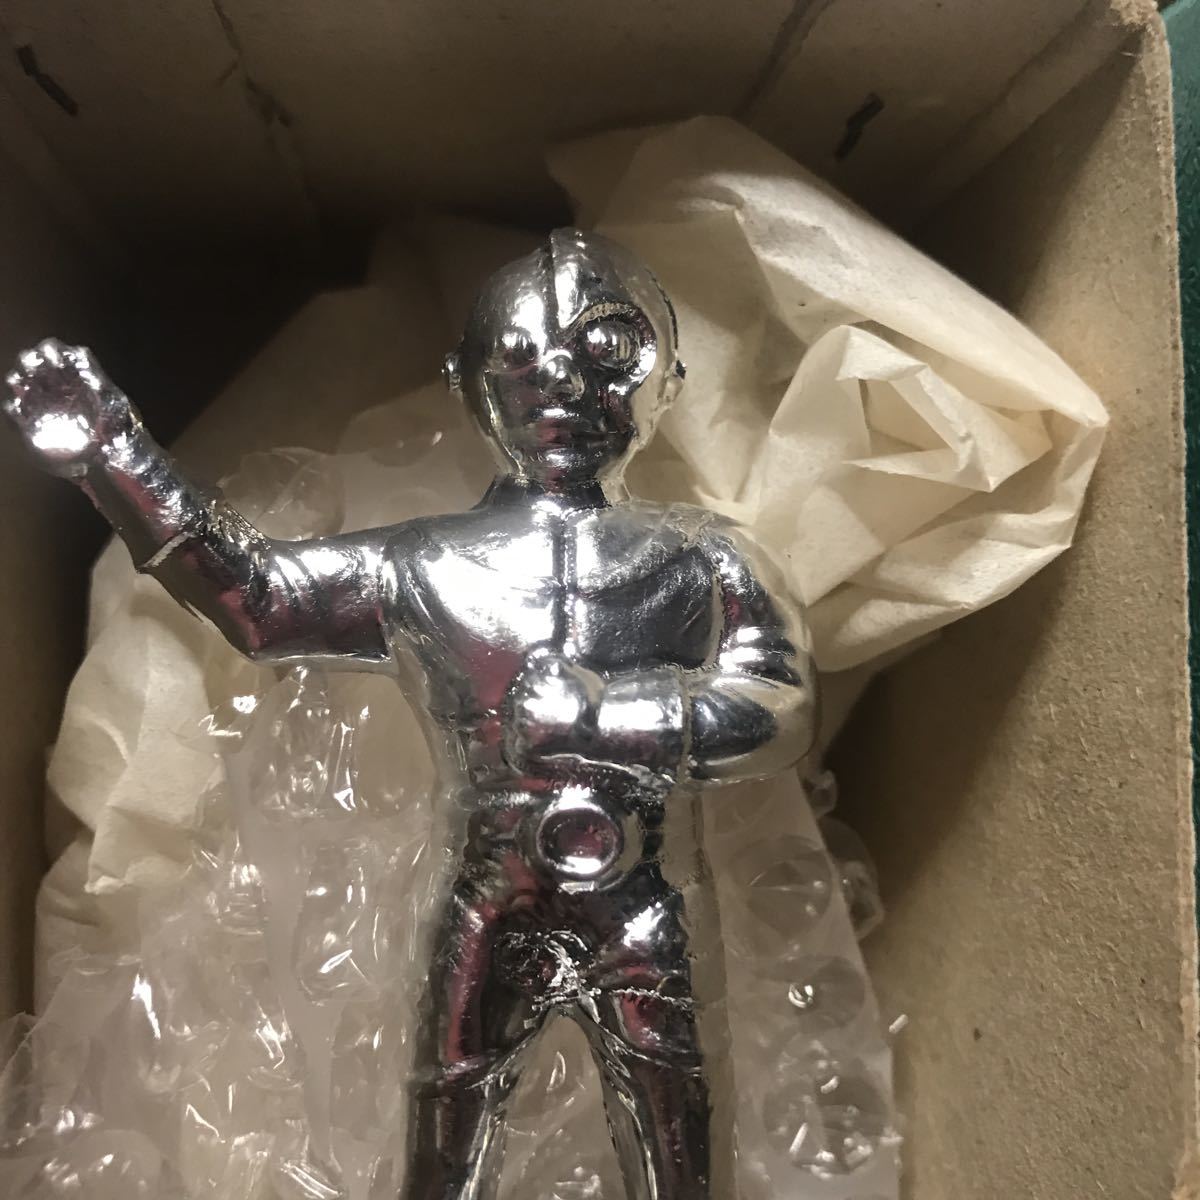  first come, first served ultra rare Android Kikaider yama sun mascot Trophy that time thing Showa Retro 